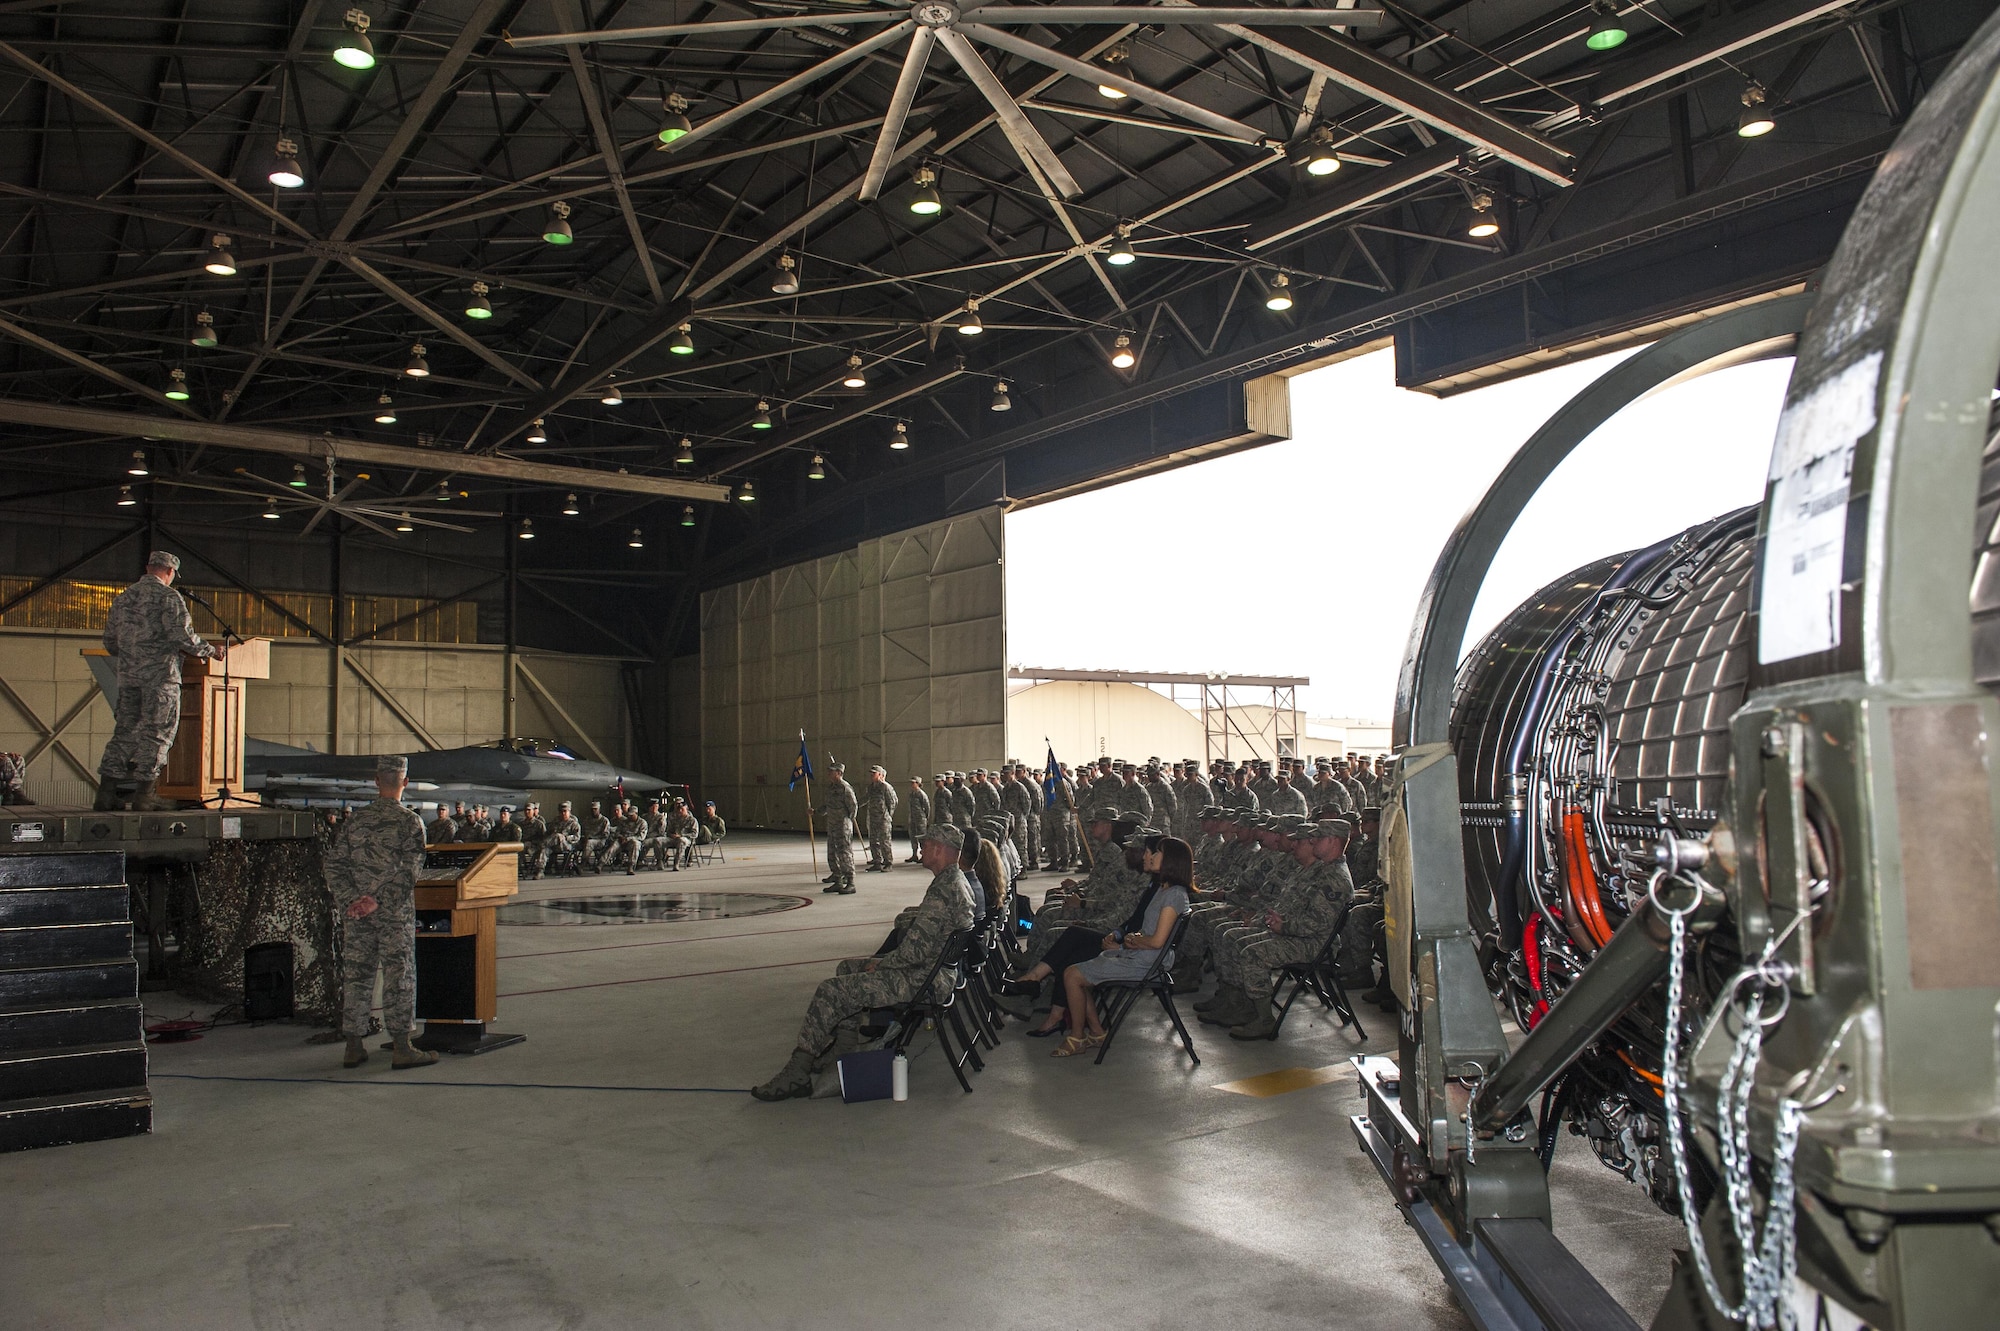 U.S. Air Force Col. George Sebren, 8th Maintenance Group commander, speaks to the 8th Fighter Wing during a change of command ceremony June 28, 2017, at Kunsan Air Base, Republic of Korea. Sebren took command of the 8th MXG from Col. James Long and, upon assuming the position, received the title of “Phoenix.” (U.S. Air Force photo by Senior Airman Colville McFee/Released)